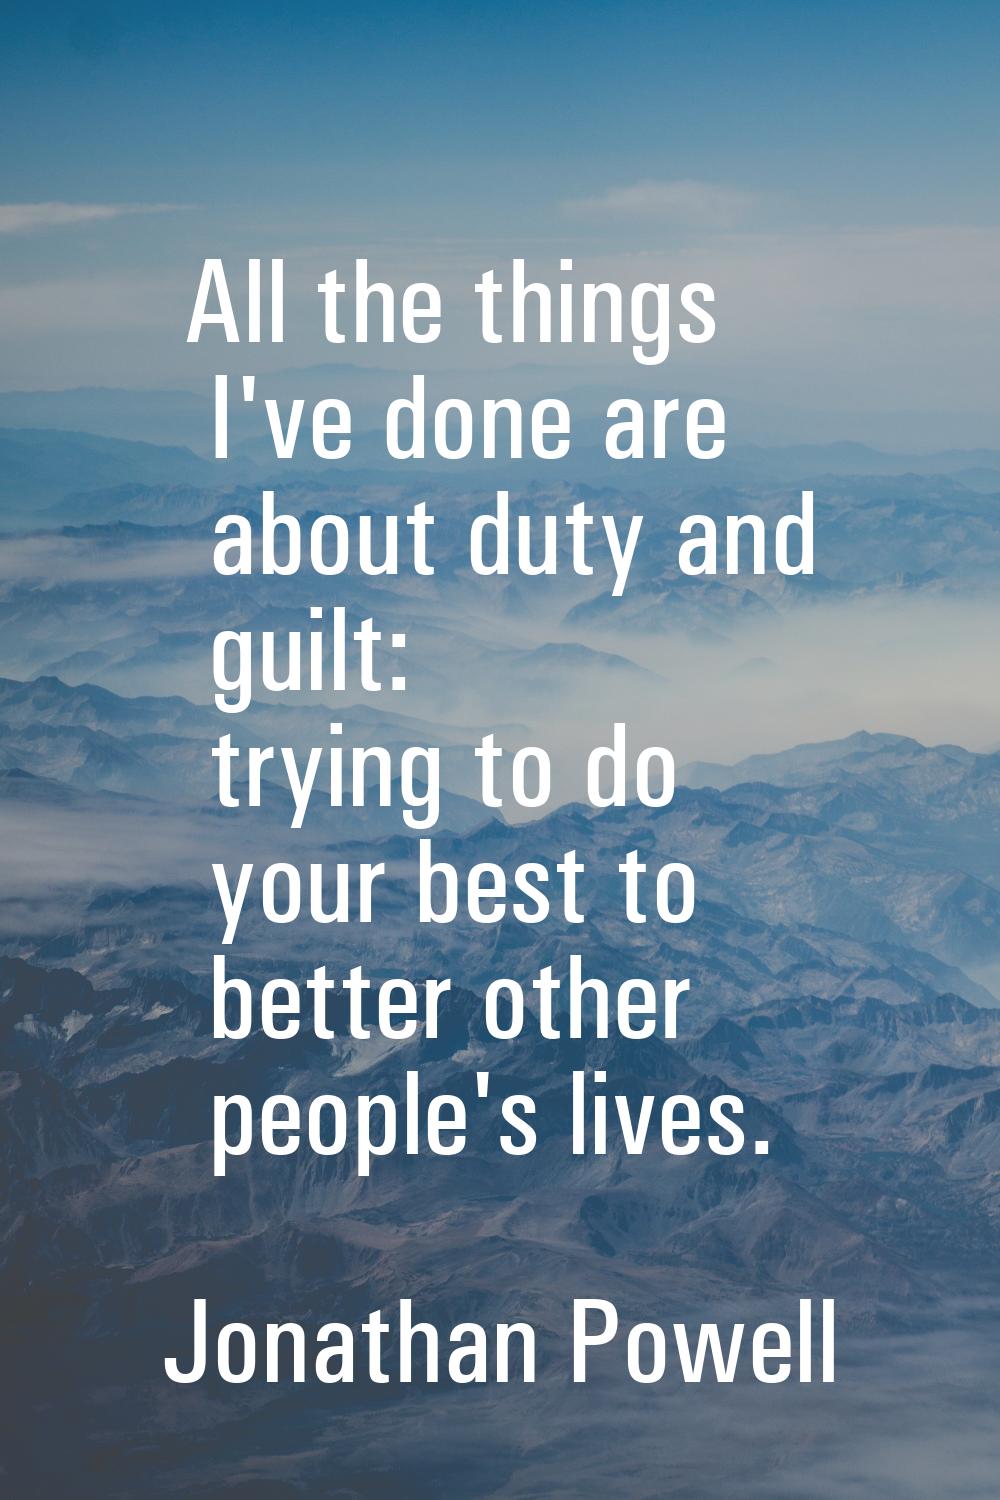 All the things I've done are about duty and guilt: trying to do your best to better other people's 